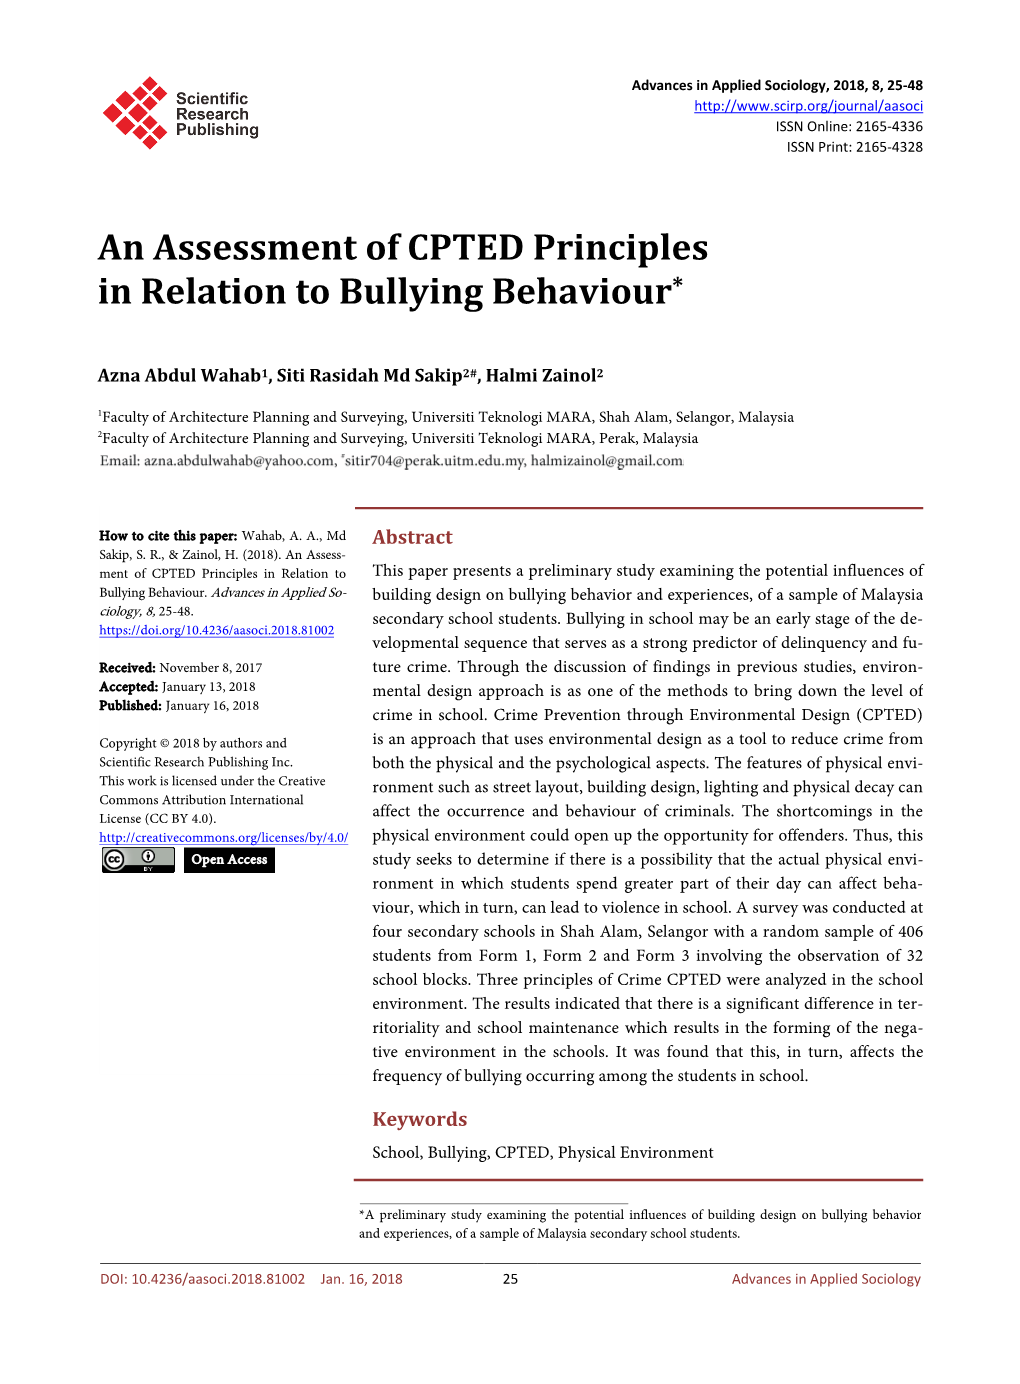 An Assessment of CPTED Principles in Relation to Bullying Behaviour*